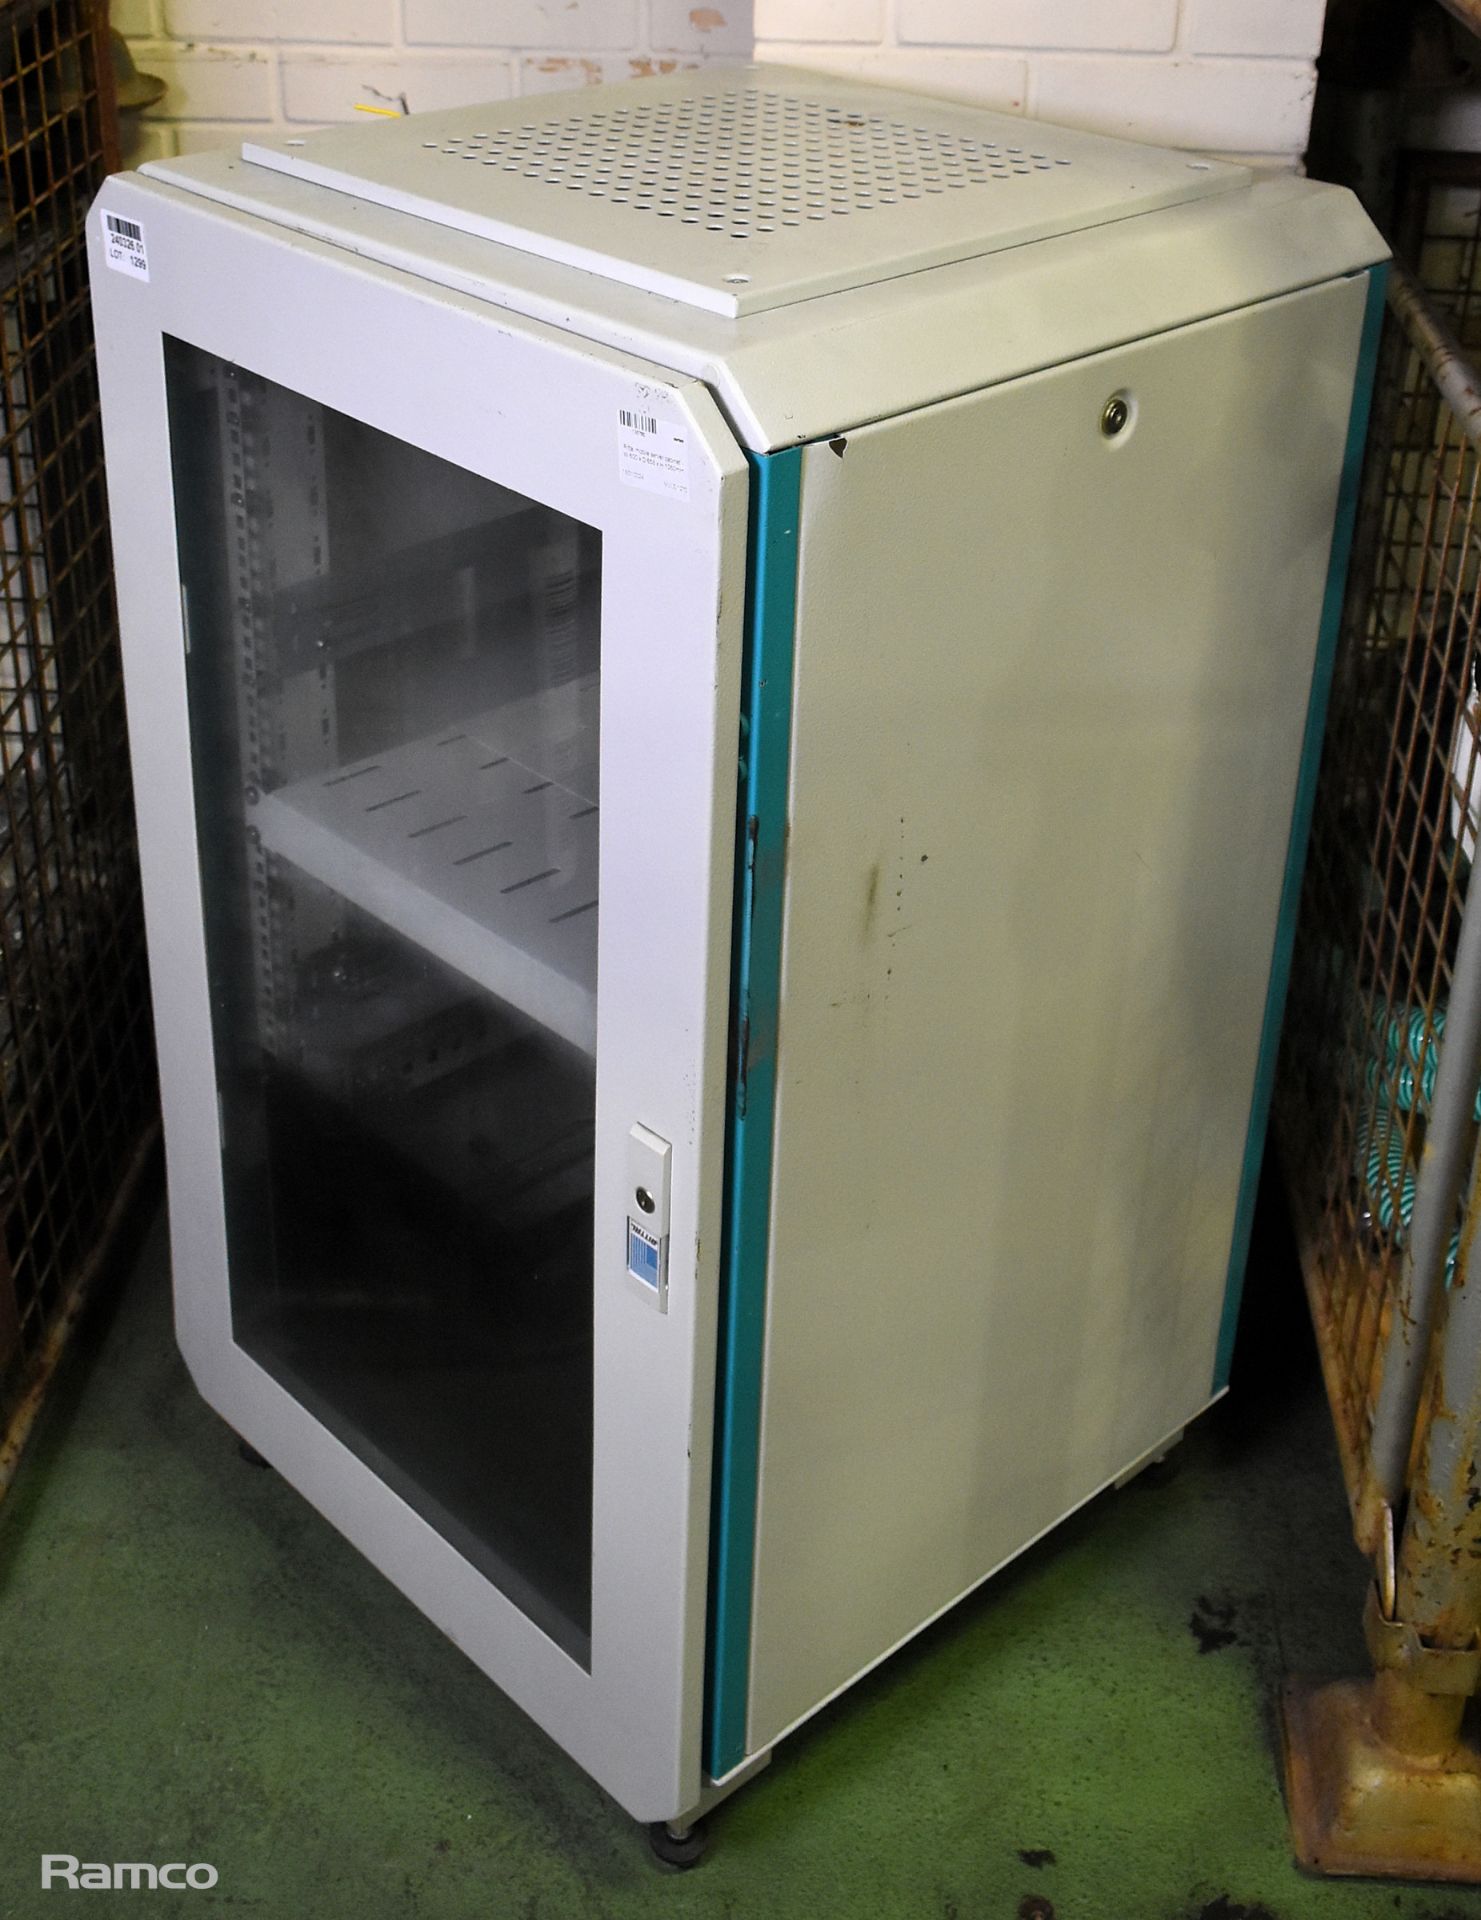 Rittal mobile server cabinet - W 600 x D 658 x H 1060mm - Image 4 of 6